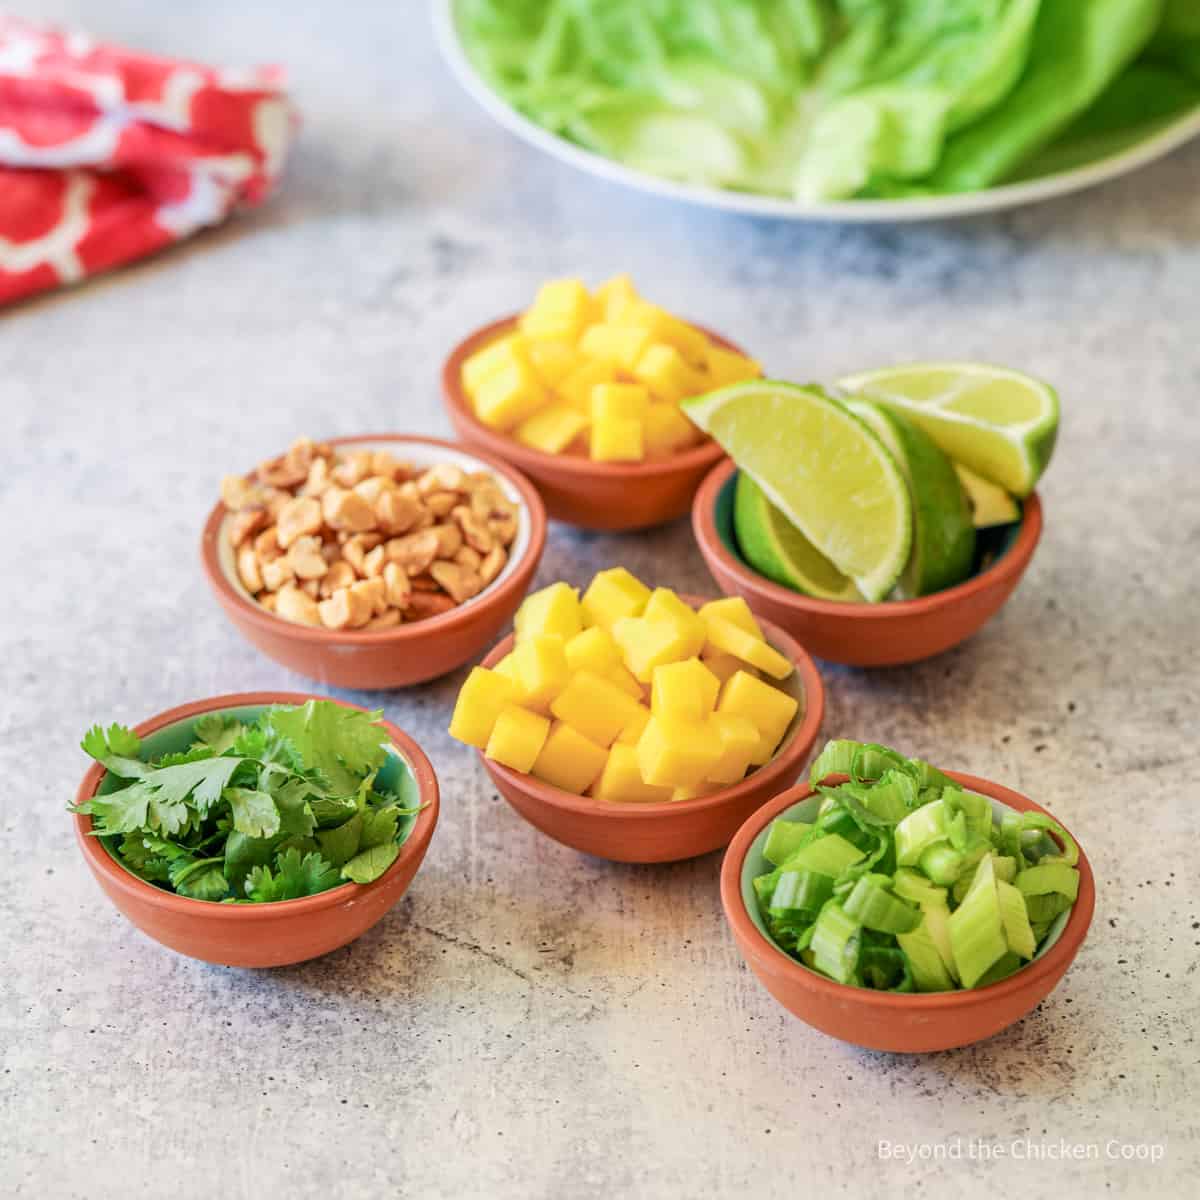 Small bowls filled with mango, green onions, cilantro, limes and peanuts.